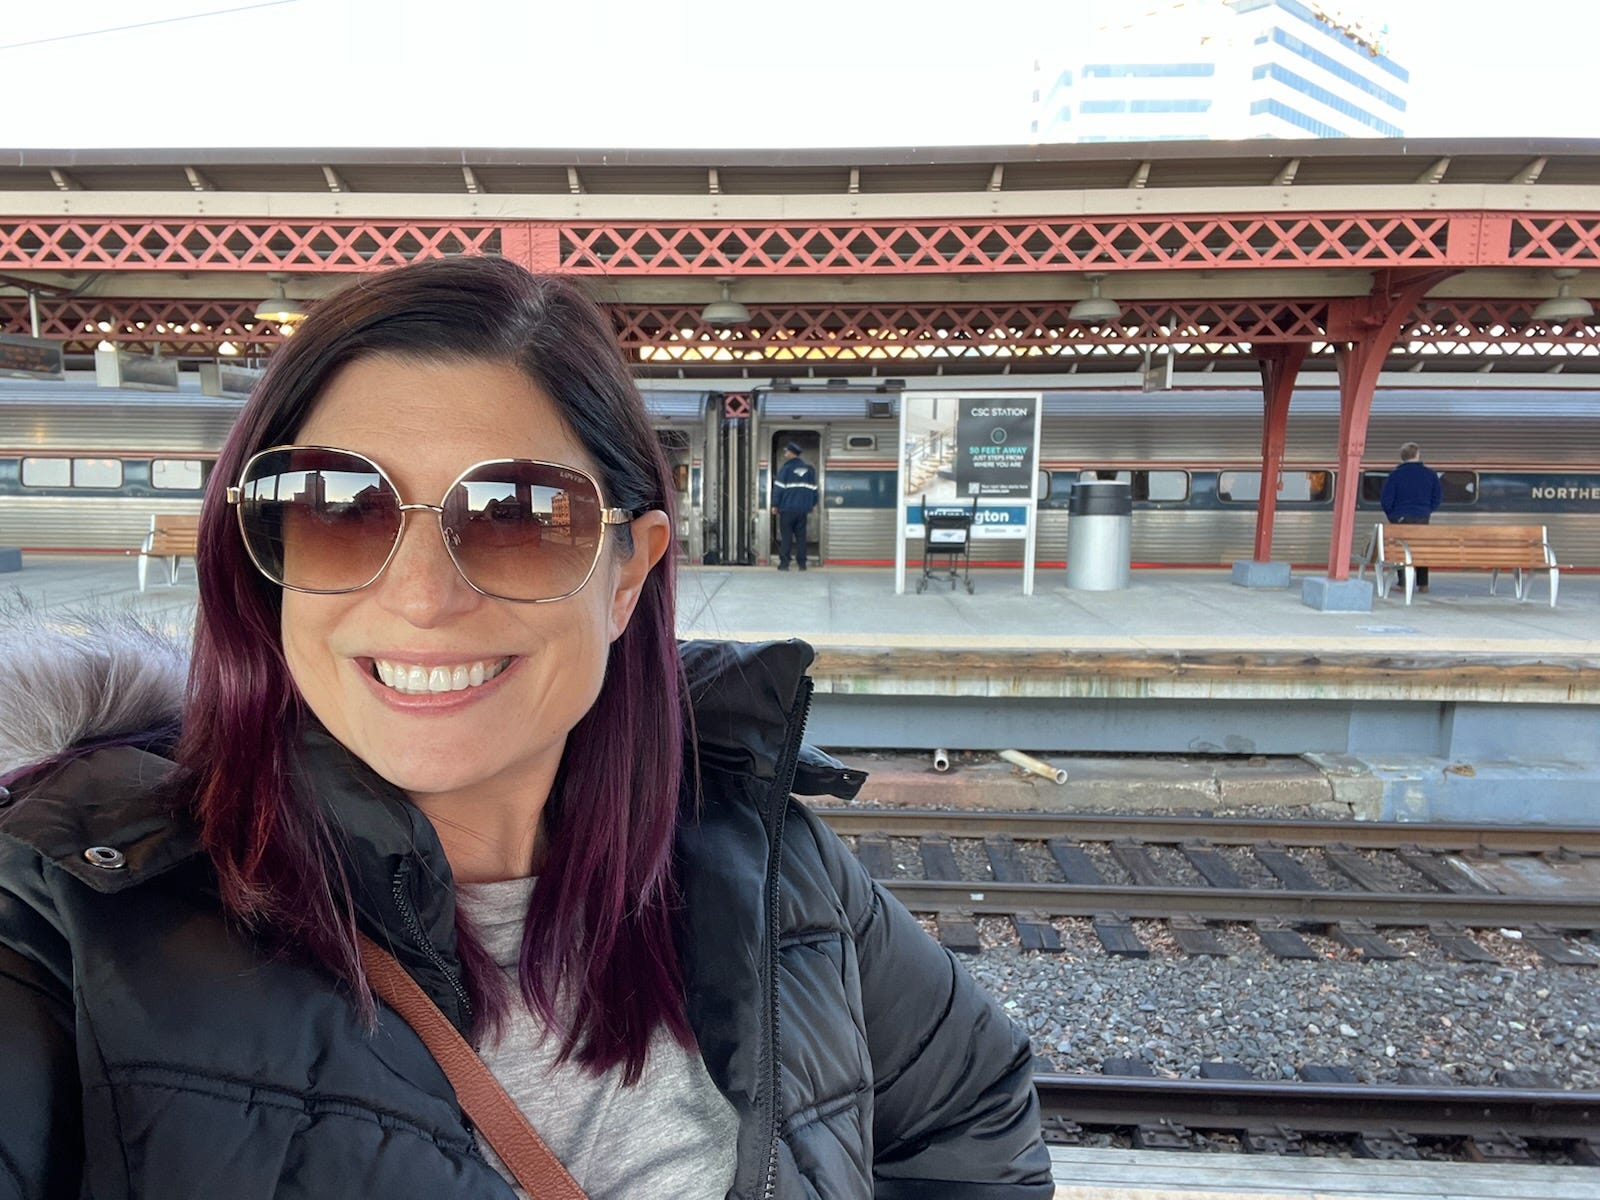 <p>Though trains aren't the most glamorous way to travel, I loved how easy the whole journey was and am eager to book more rail-based trips in the future. </p><p>The ability to accomplish work and other tasks, especially ones that I can't do while driving or navigating airports, is appealing, as is the ability to sit back and unwind while someone else does the steering.</p><p>The <a href="https://www.insider.com/best-parts-of-long-train-rides-from-traveler-2021-9">benefits of train travel</a> became especially evident as we drove to Baltimore on the final leg of our trip. During a heavy rainstorm, I got stuck in a traffic jam while navigating unfamiliar roads.</p><p>At that moment, I longed instead to be sitting back in my train seat, effortlessly cruising to my next destination.</p>